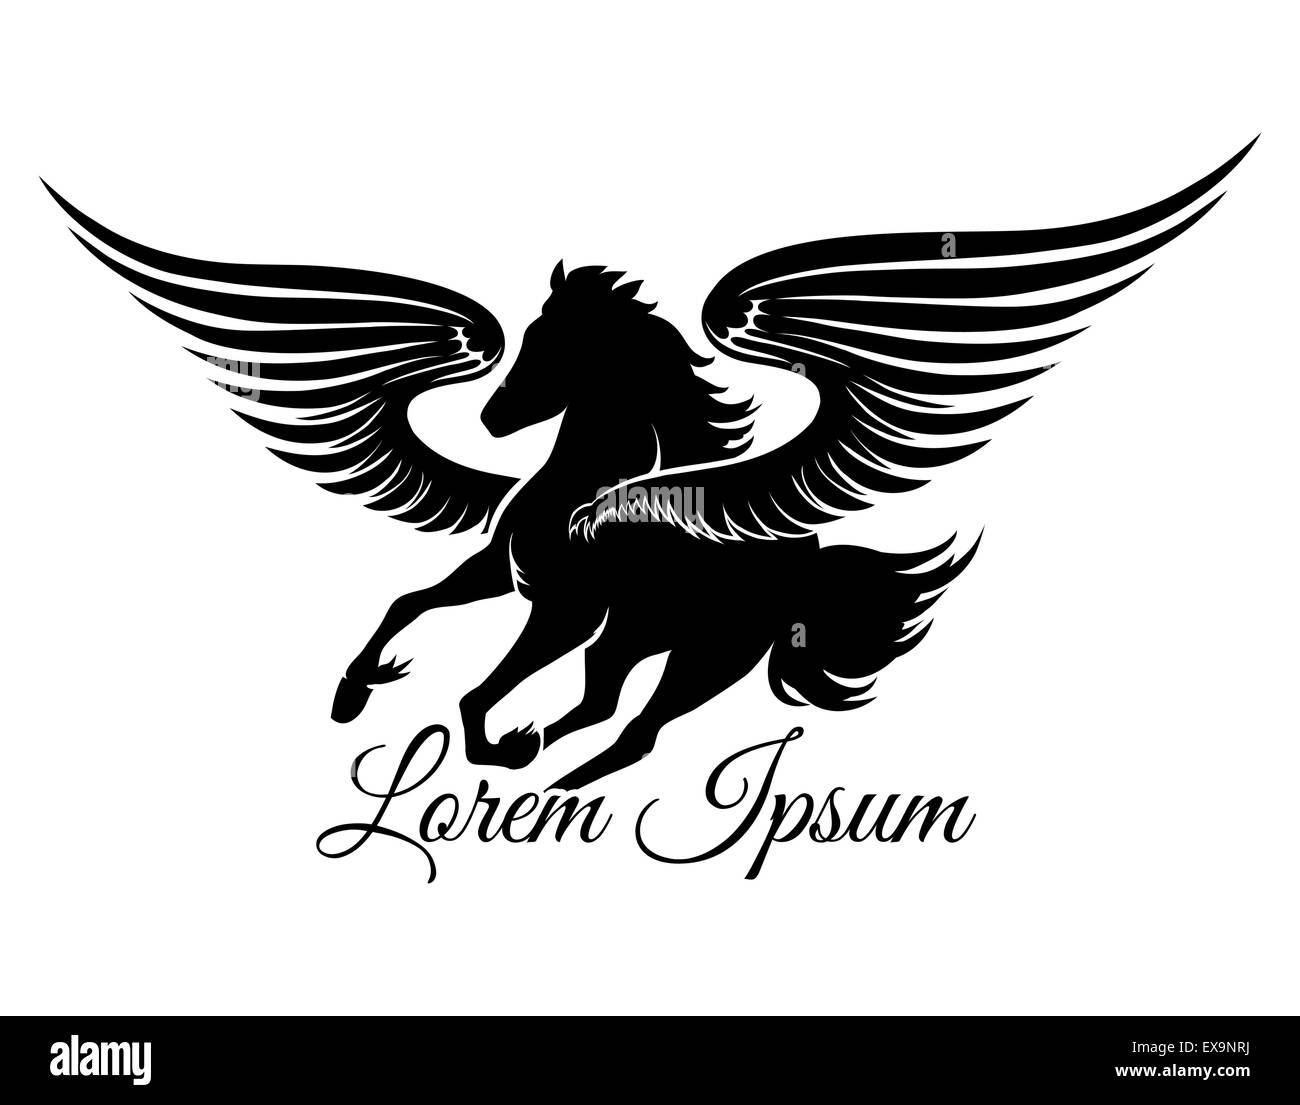 Winged stallion logo or emblem. Isolated on white background. Free font Great Vibes used. Stock Vector